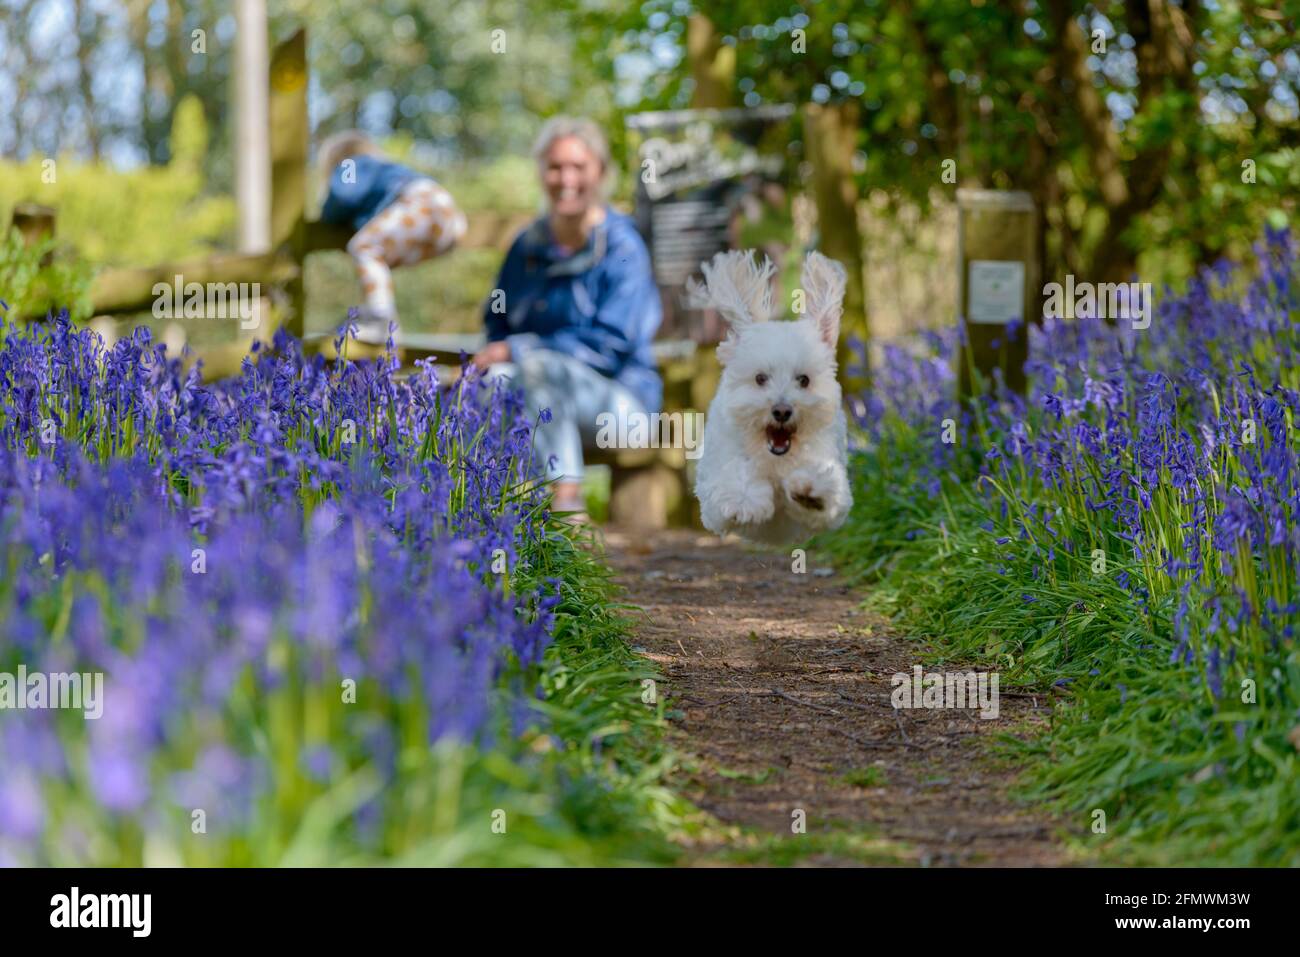 A mother and toddler walking with a cute small white dog caught running in mid-air in the Spring Bluebells trail at Guestling Wood, Pett, near Hastings, East Sussex, England, UK Stock Photo